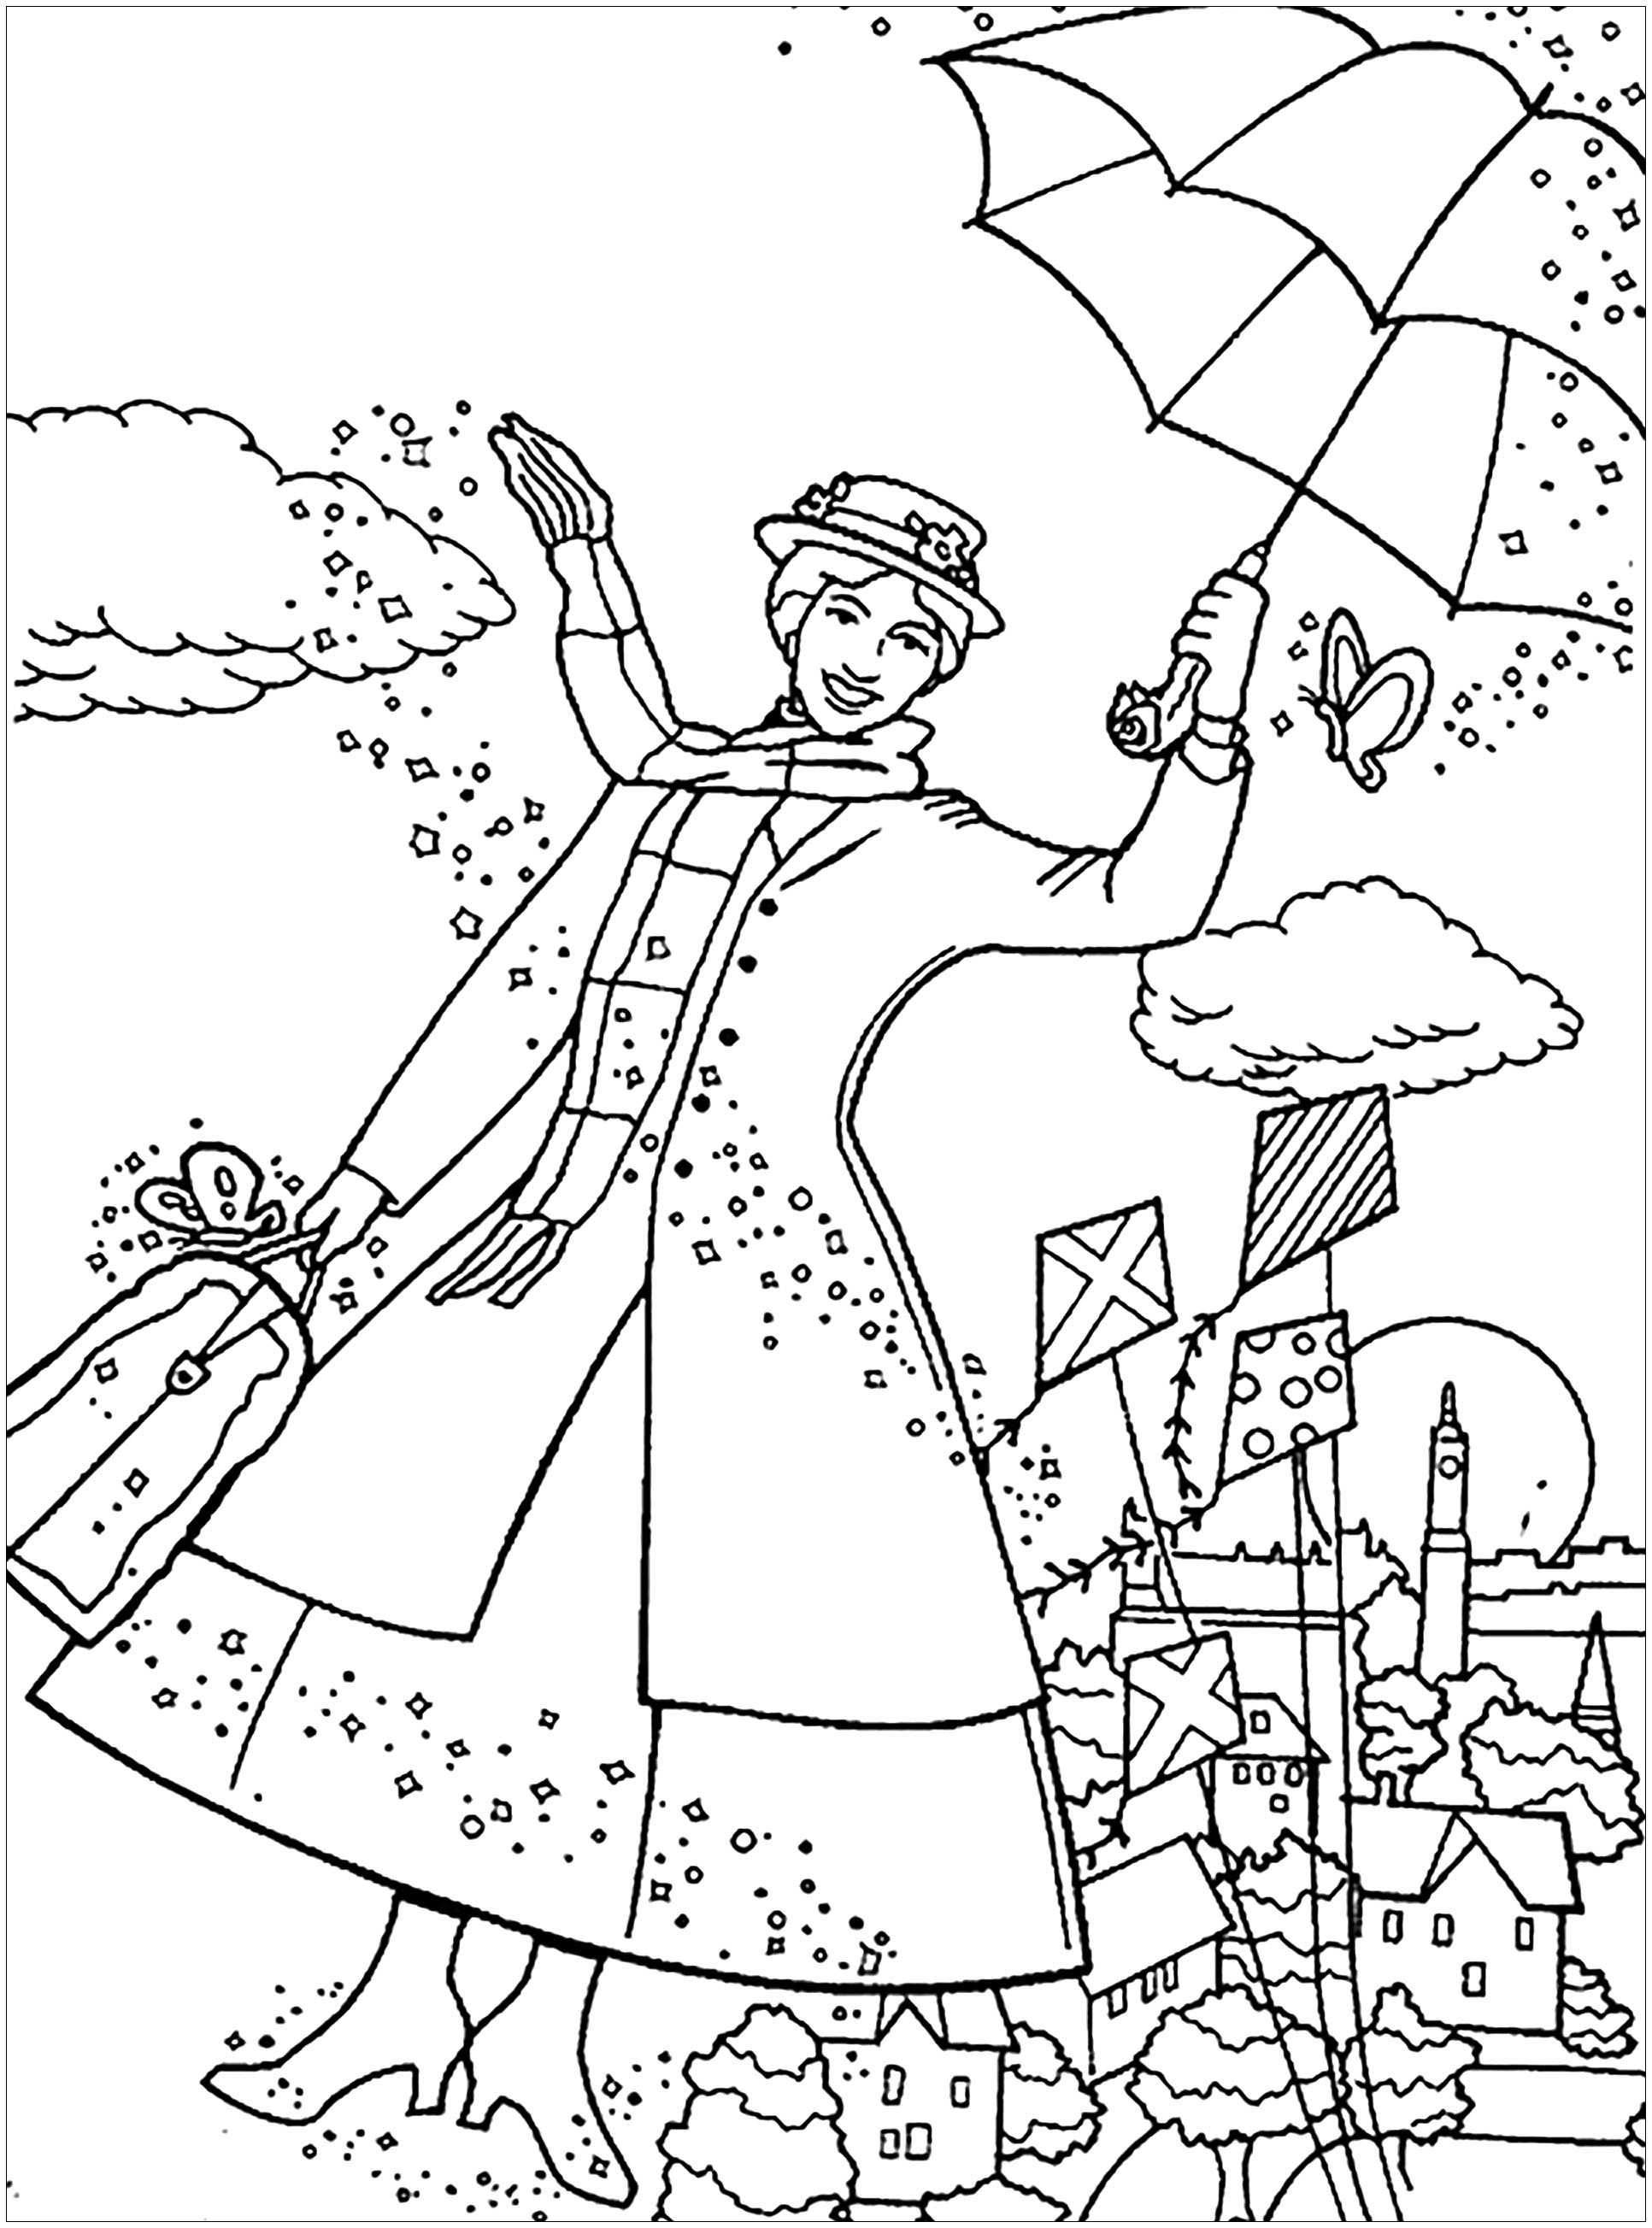 mary-poppins-coloring-pages-best-coloring-pages-for-kids